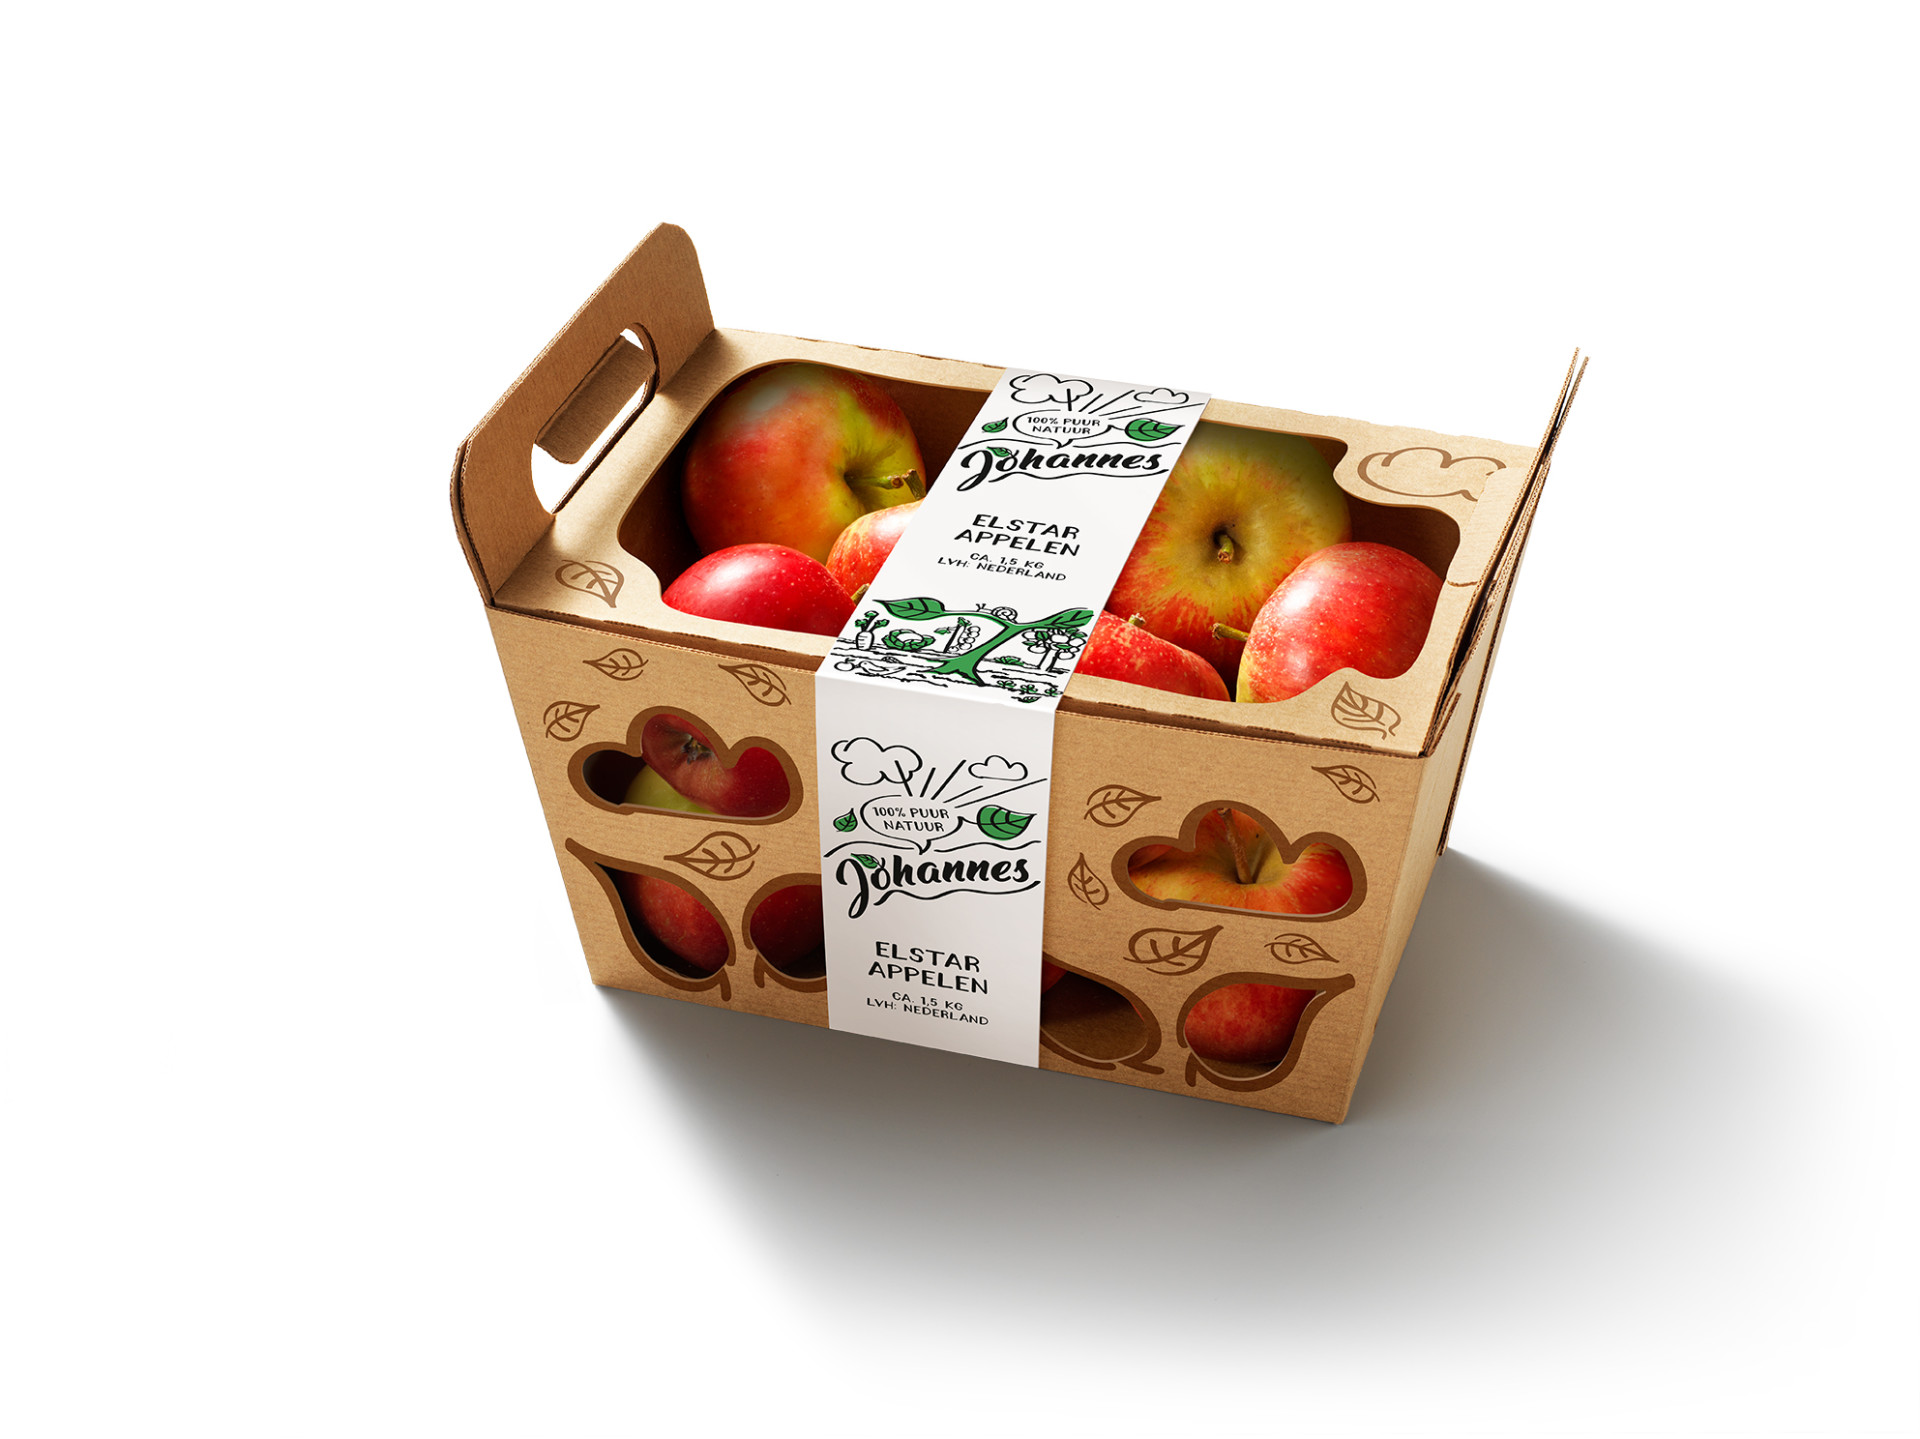 Carton-tray-packaged-apples-0E0AF63752